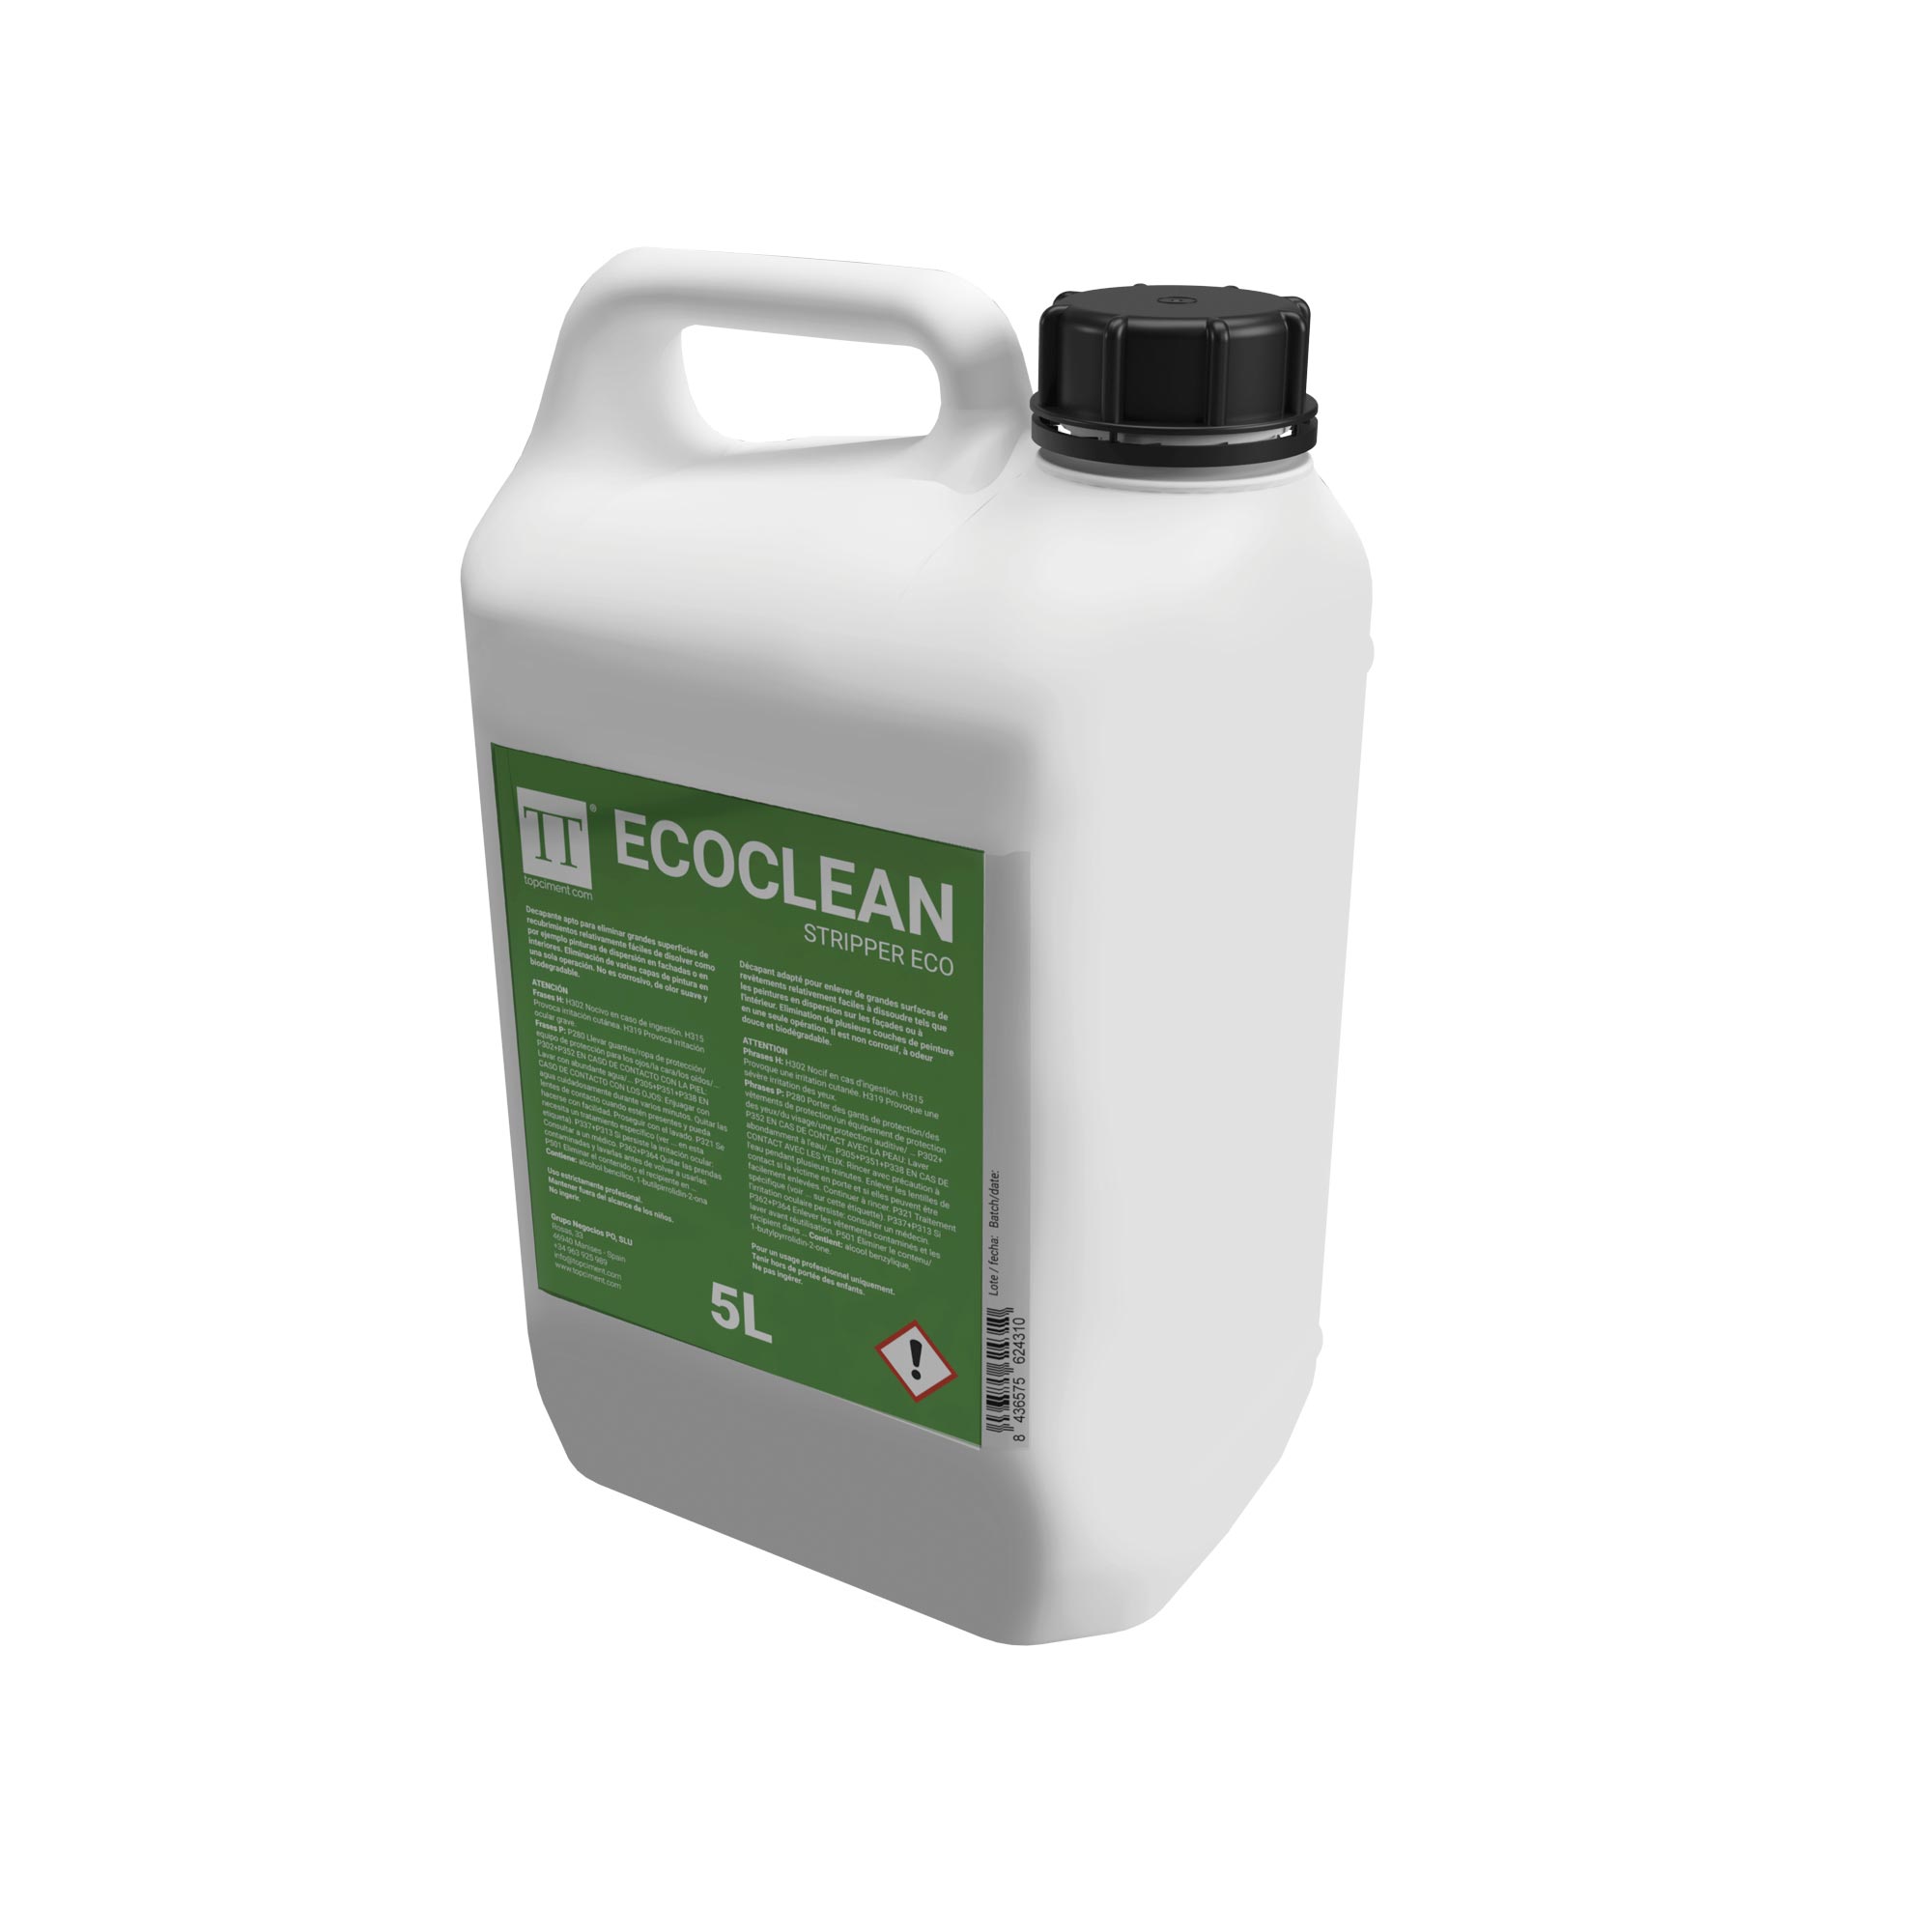 Ecoclean Stripper Eco